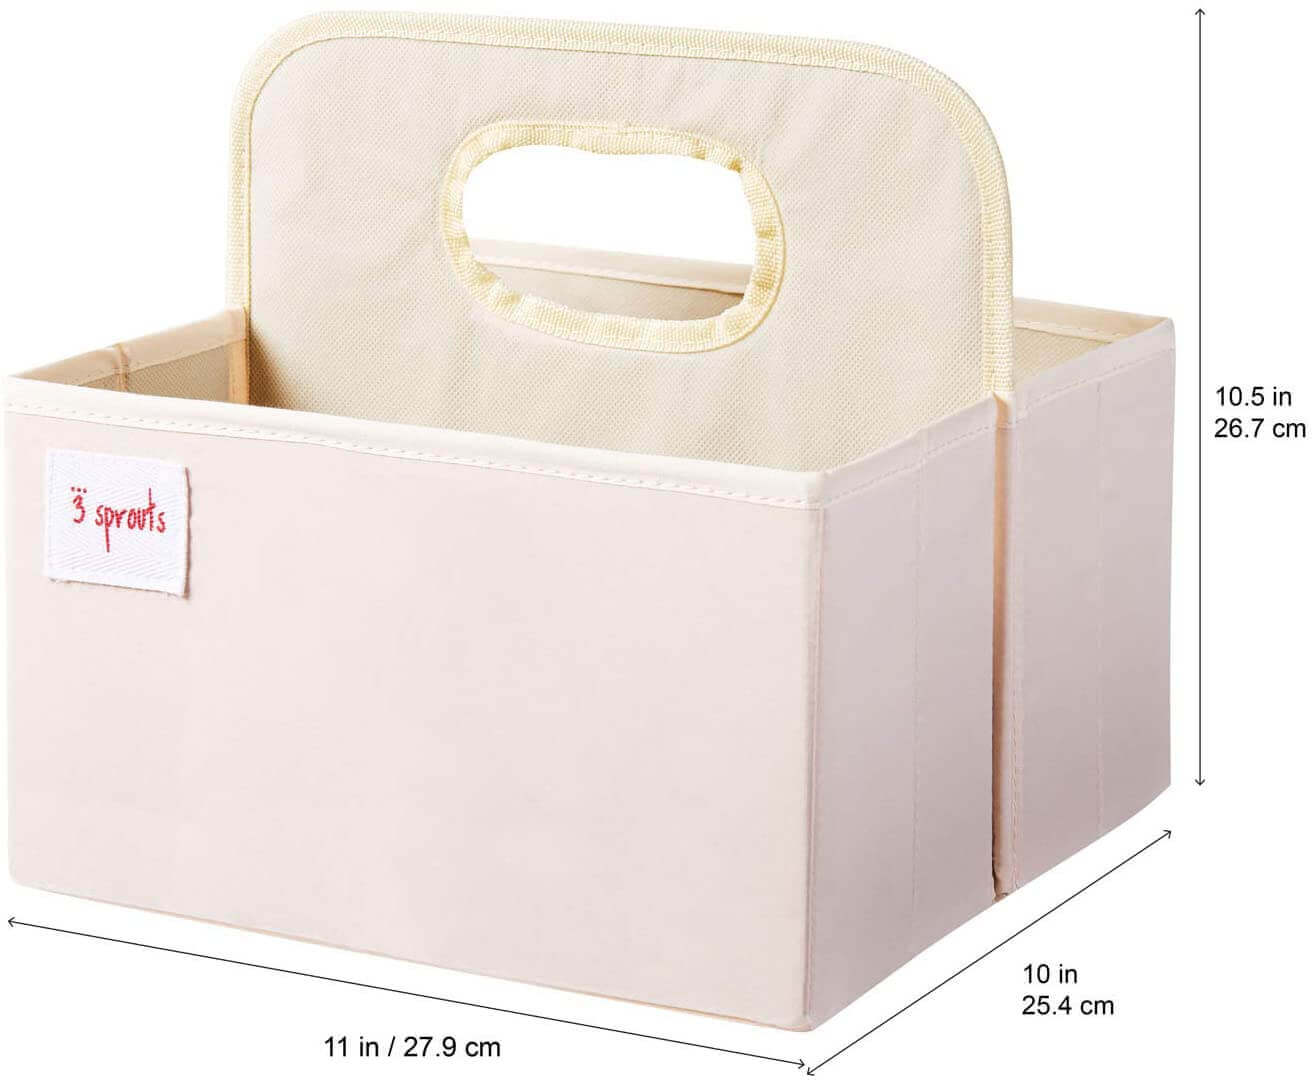 3 Sprouts Baby Nappy Caddy - Organiser Basket for Nursery Colour Name: Whale furniture storage Earthlets